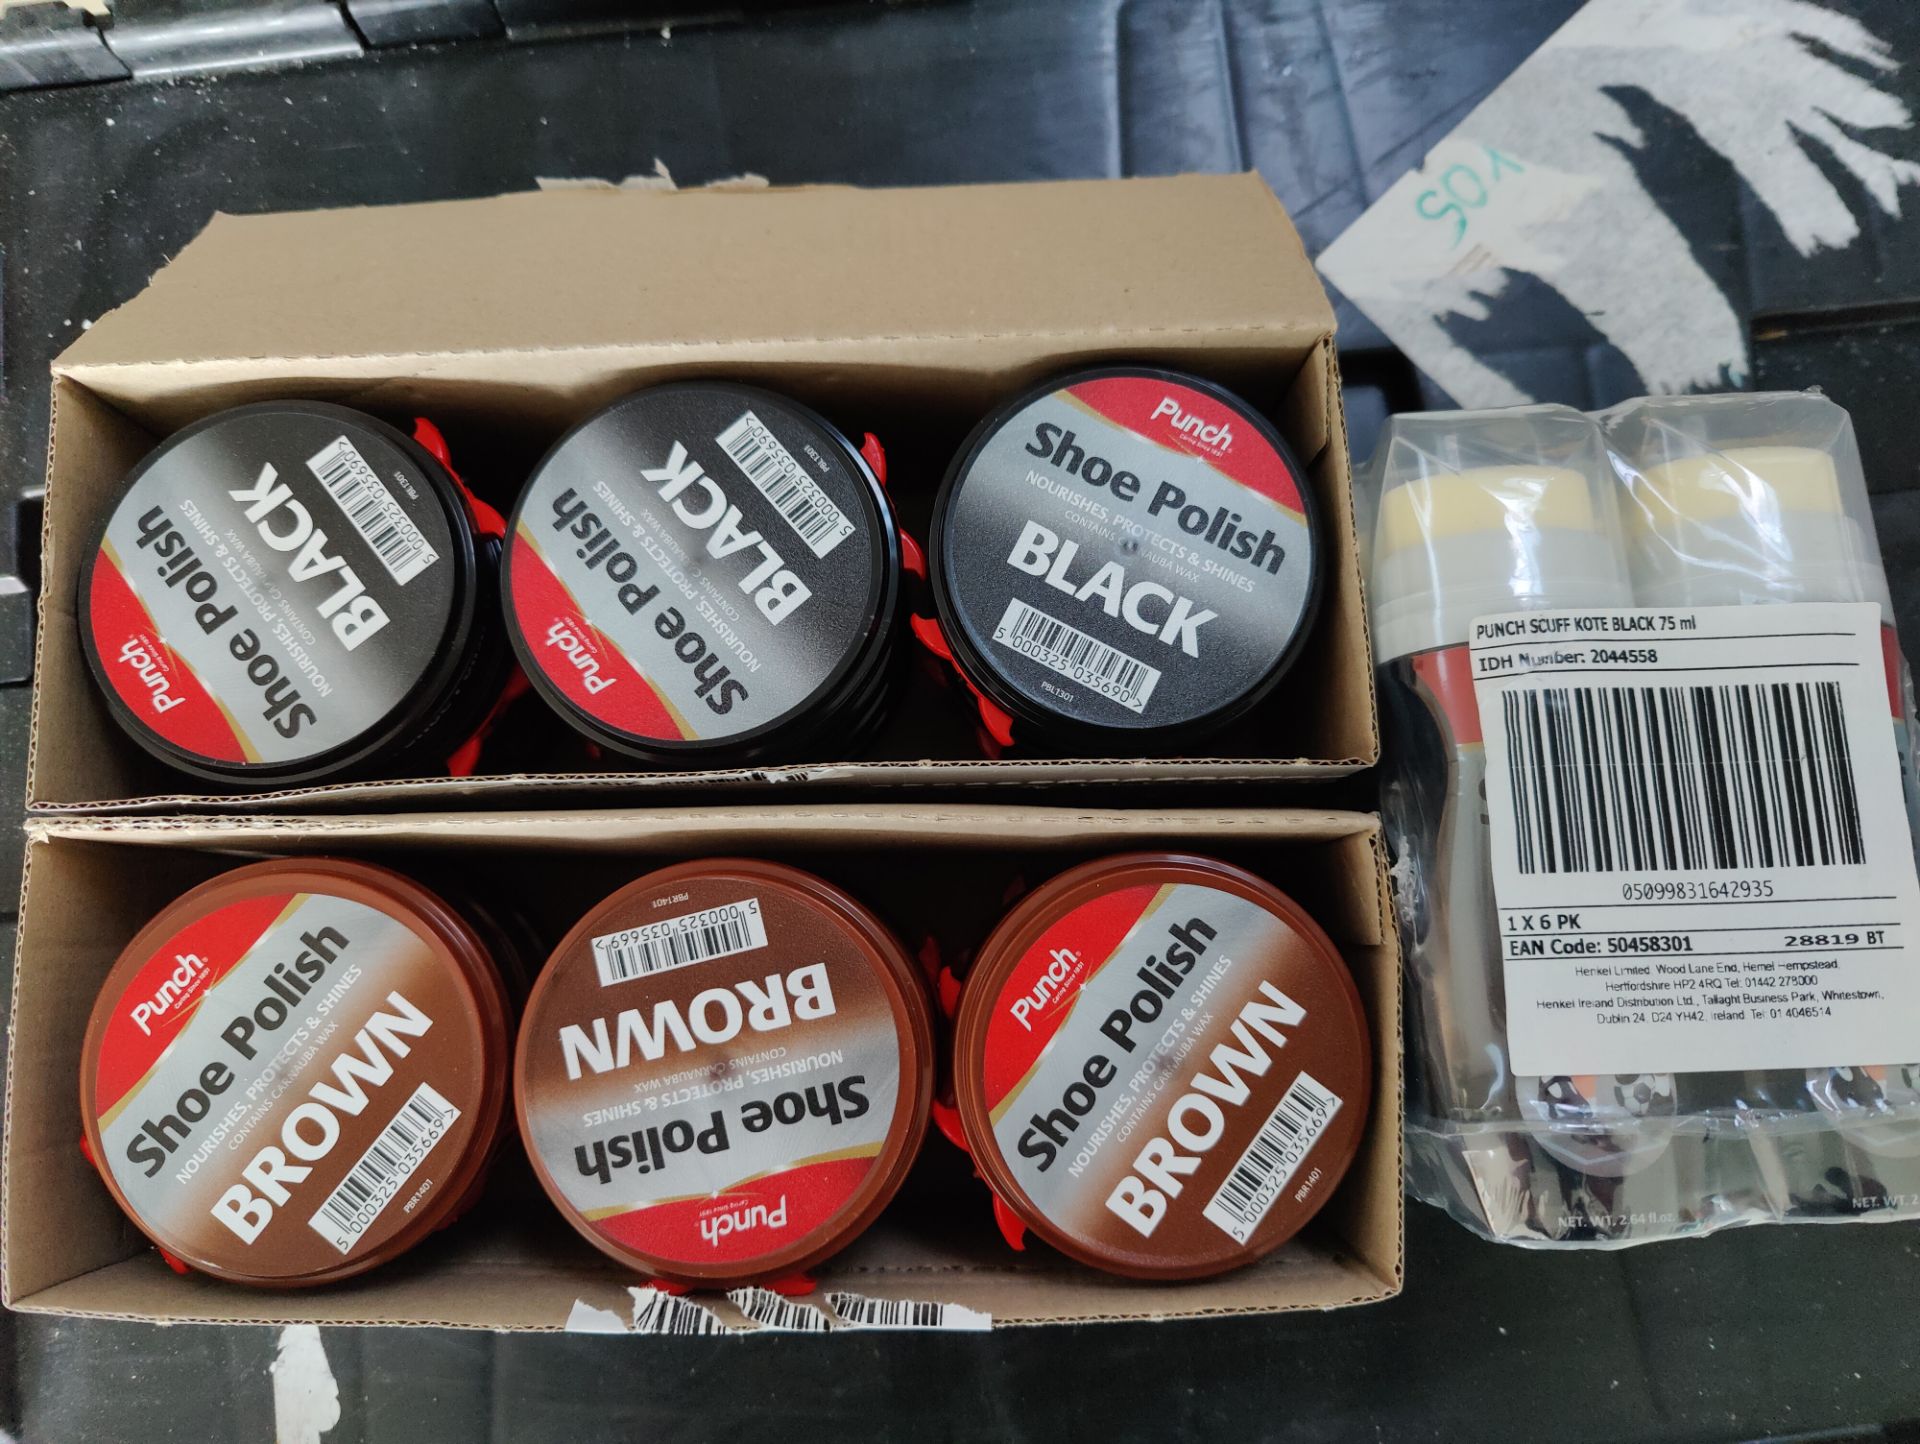 Clearance Joblot Box of 24 Punch Shoe Polish Black, Brown and 6 Scuff